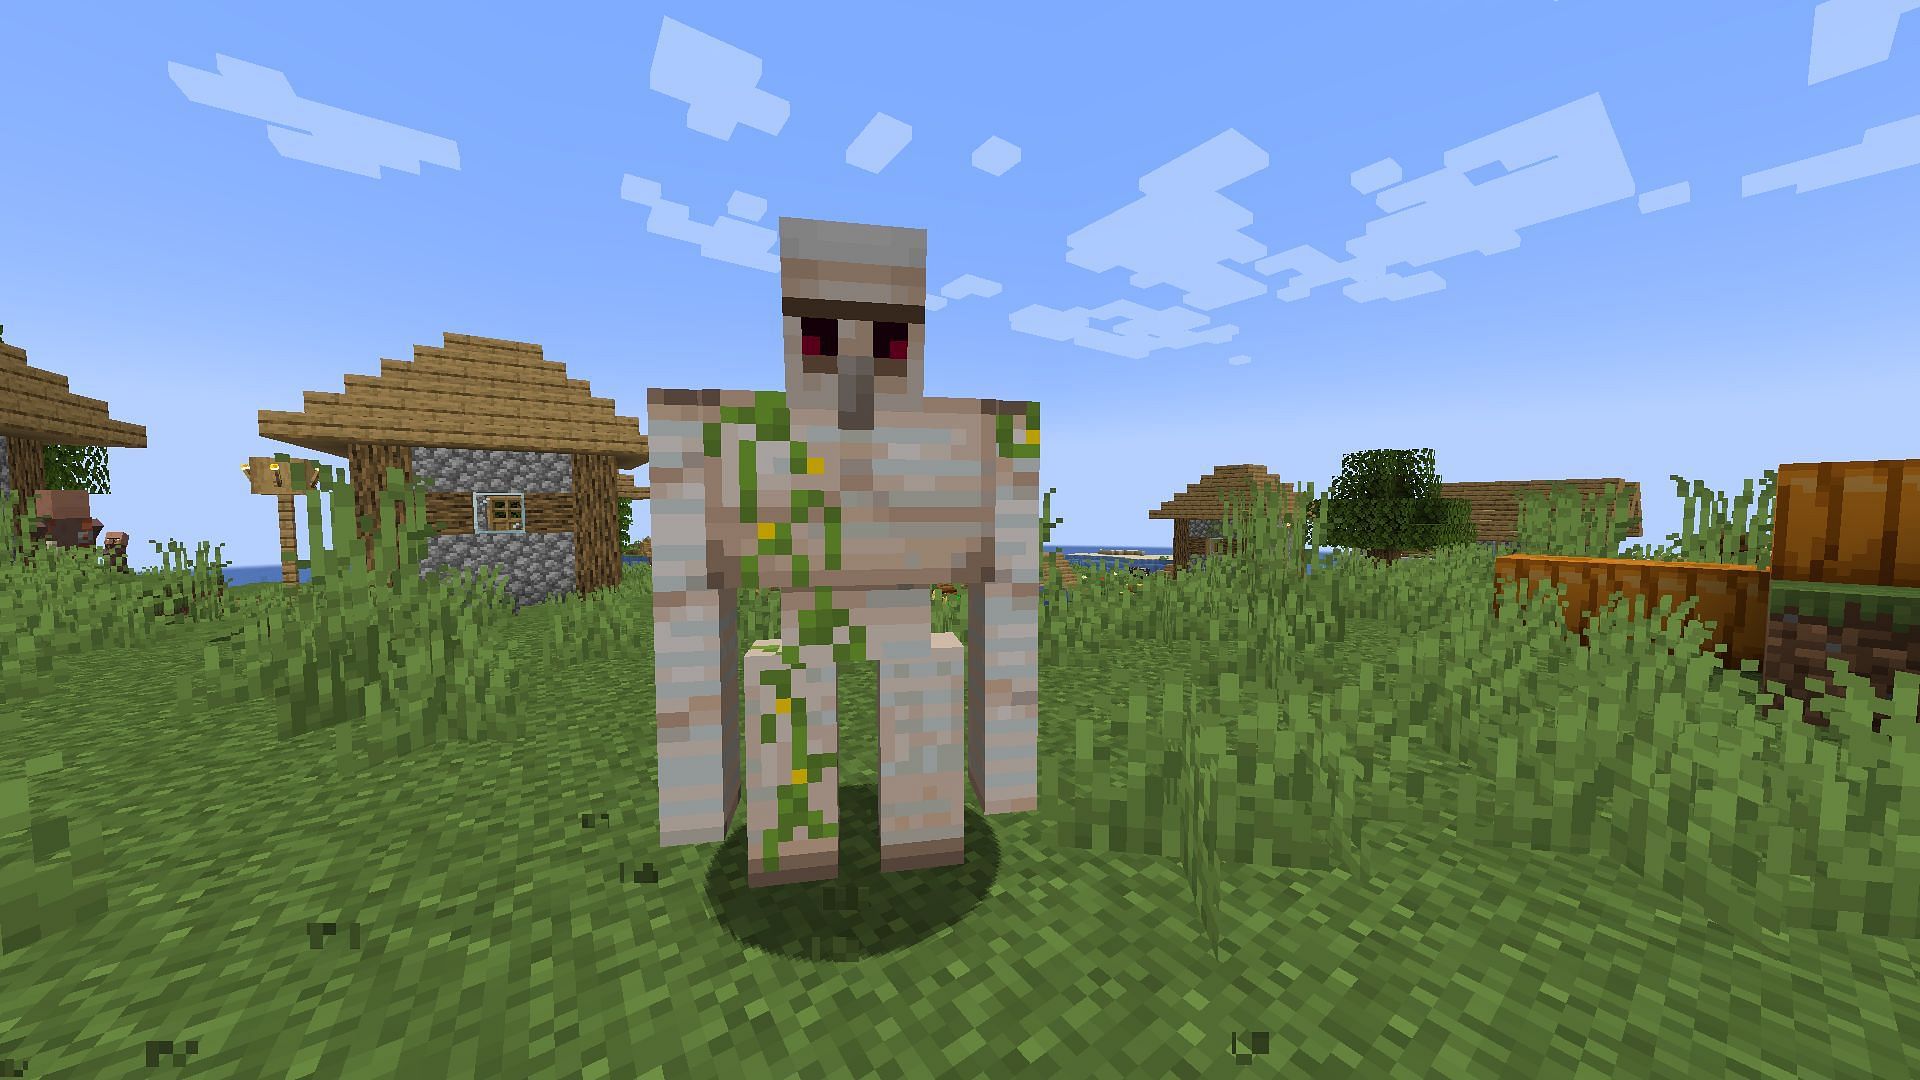 Iron Golems are fascinating mobs in Minecraft (Image via Mojang)